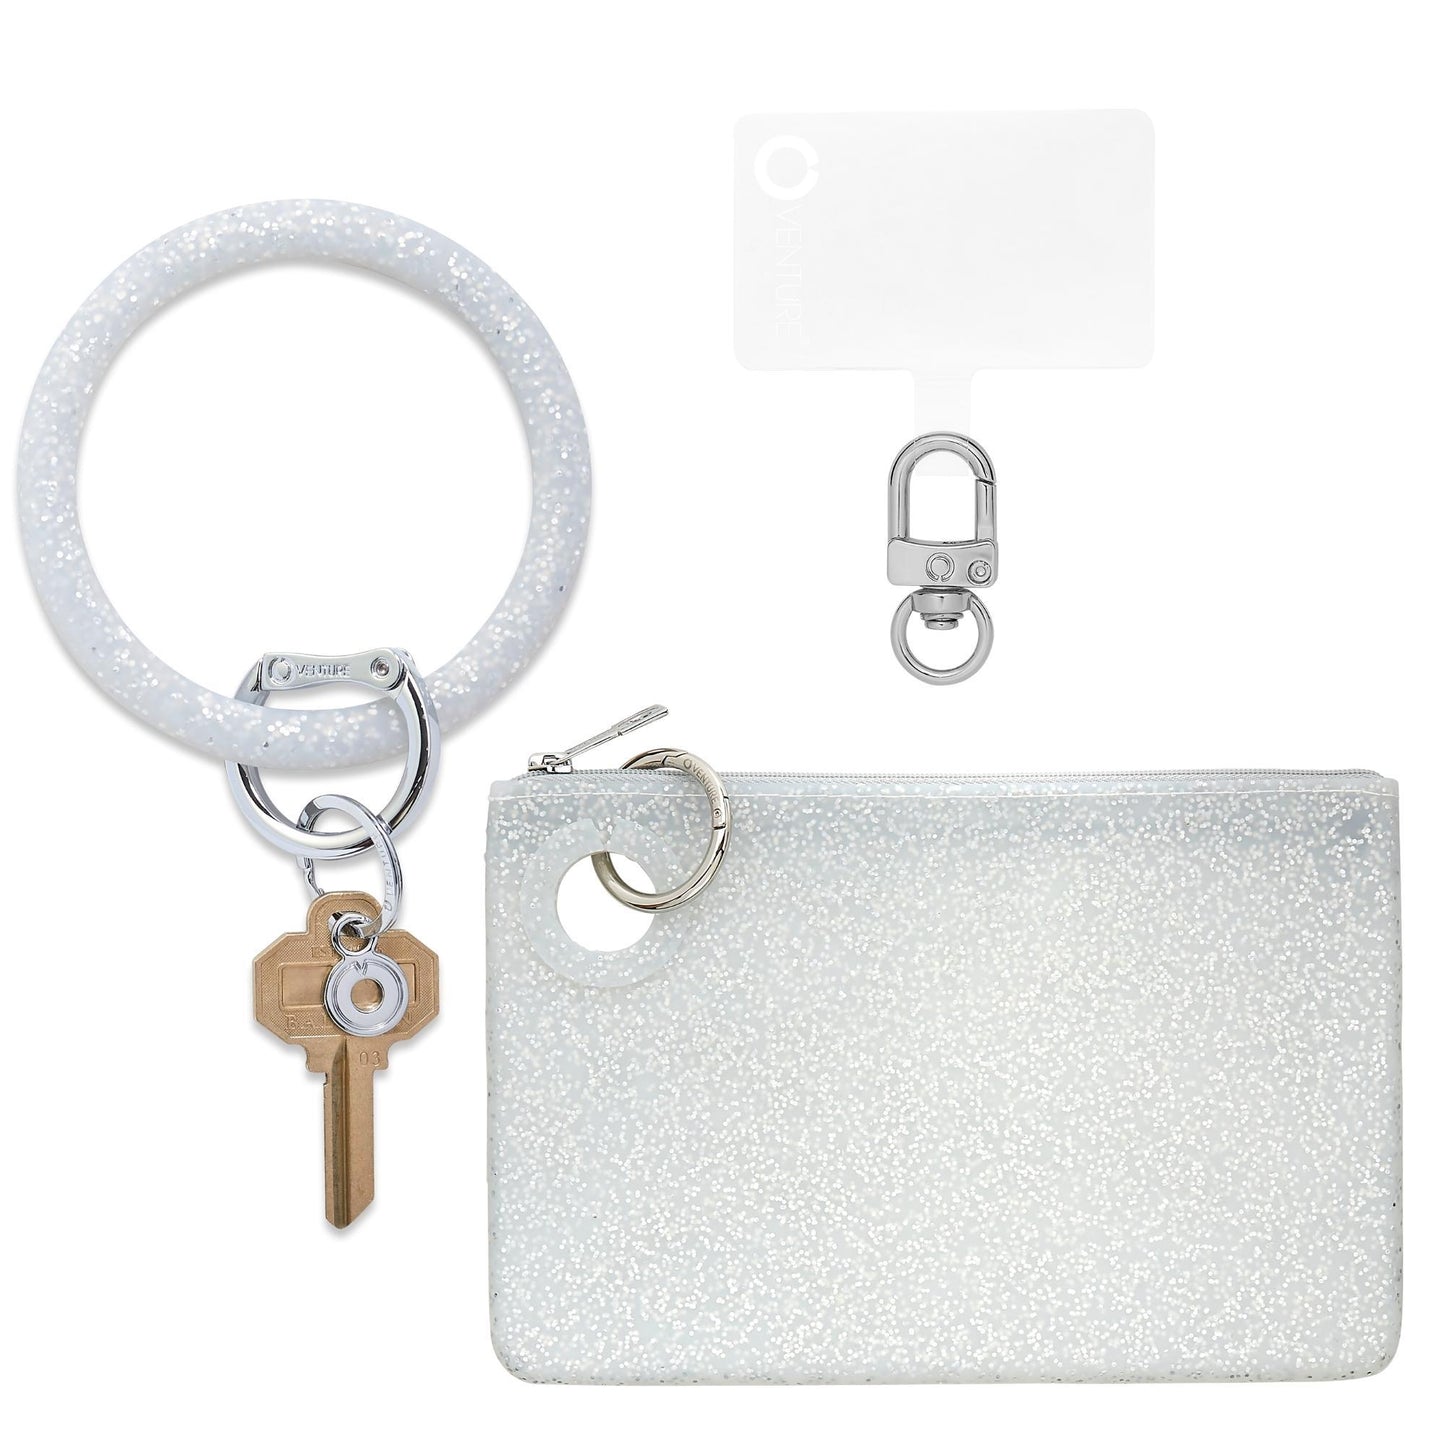 Stylish Large Pouch Wristlet with Phone Holder in silver confetti.